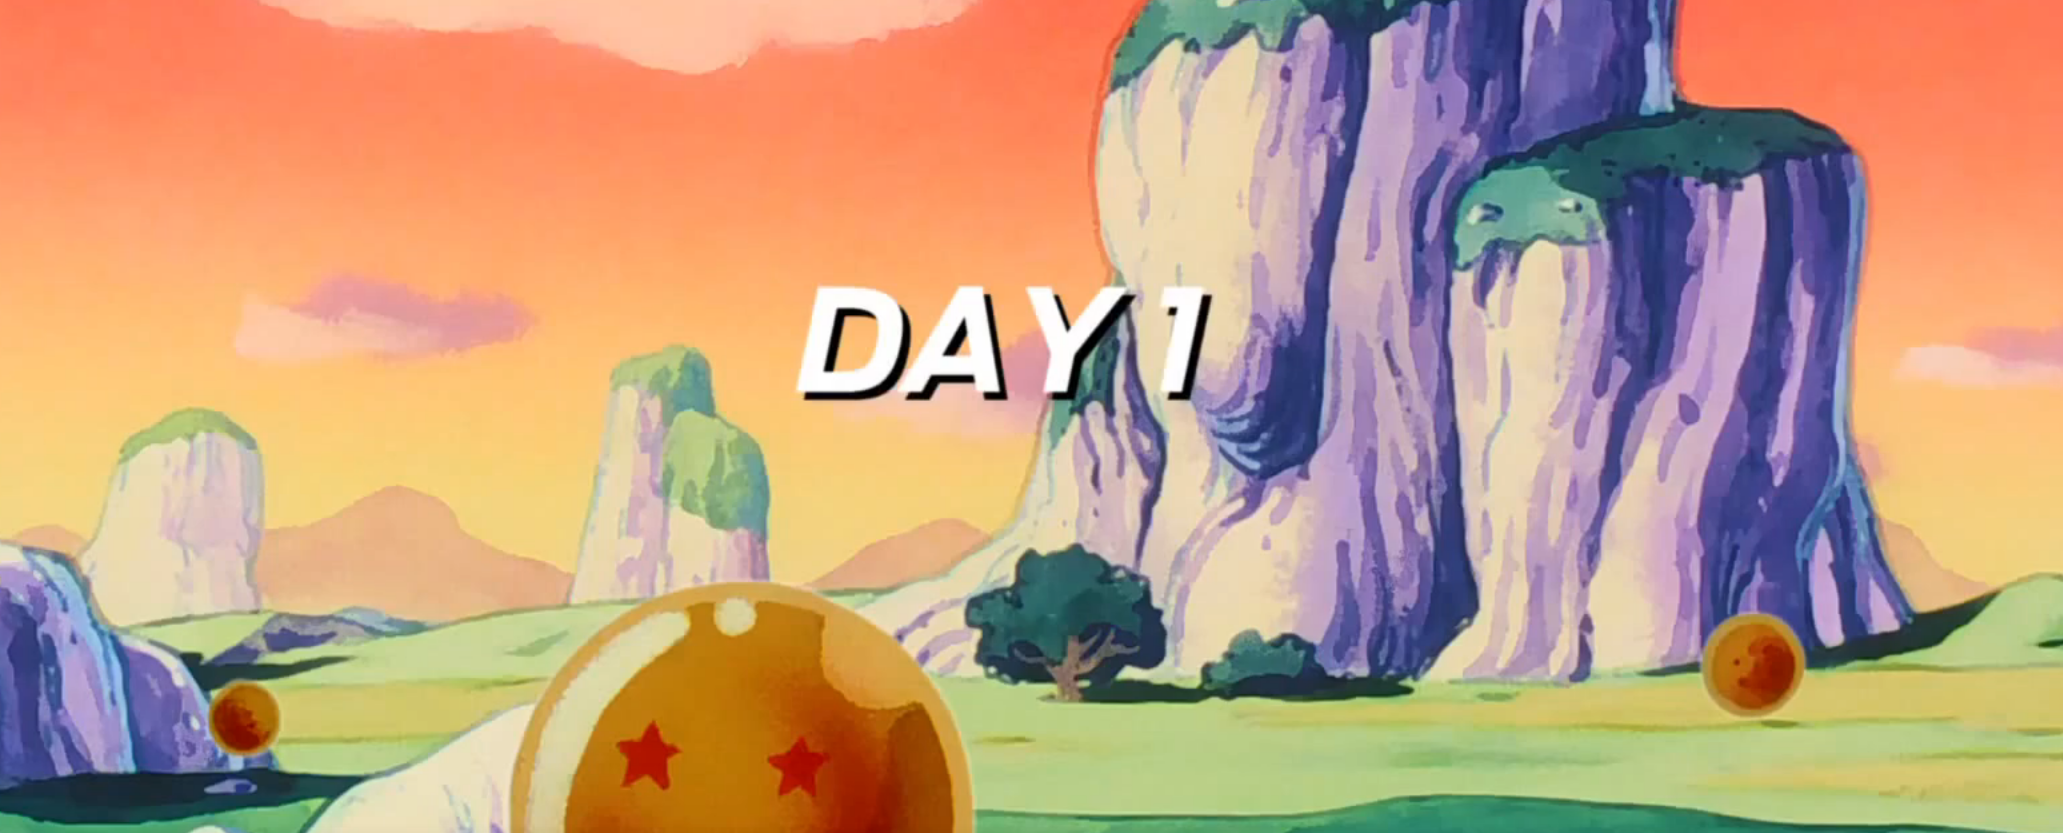 You are currently viewing Episode 7: Day 1